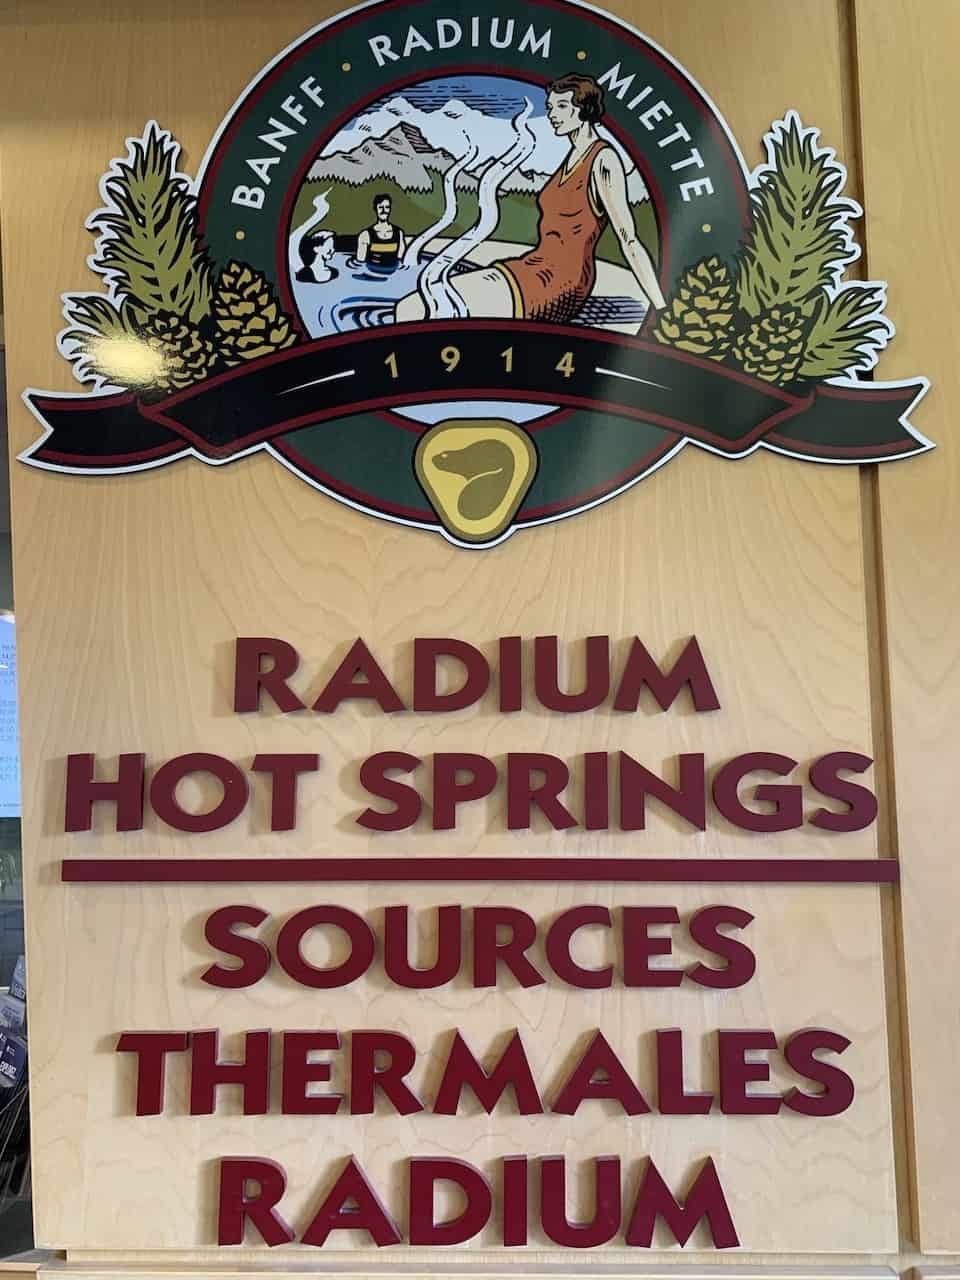 Radium Hot Springs Pool Sign - Radium Hot Springs in British Columbia, is a part of a group of hot springs run by Parks Canada. They group also includes Banff and Miette. They are known as the Canadian Rockies Hot Springs and three of Canada's most iconic hot pools.